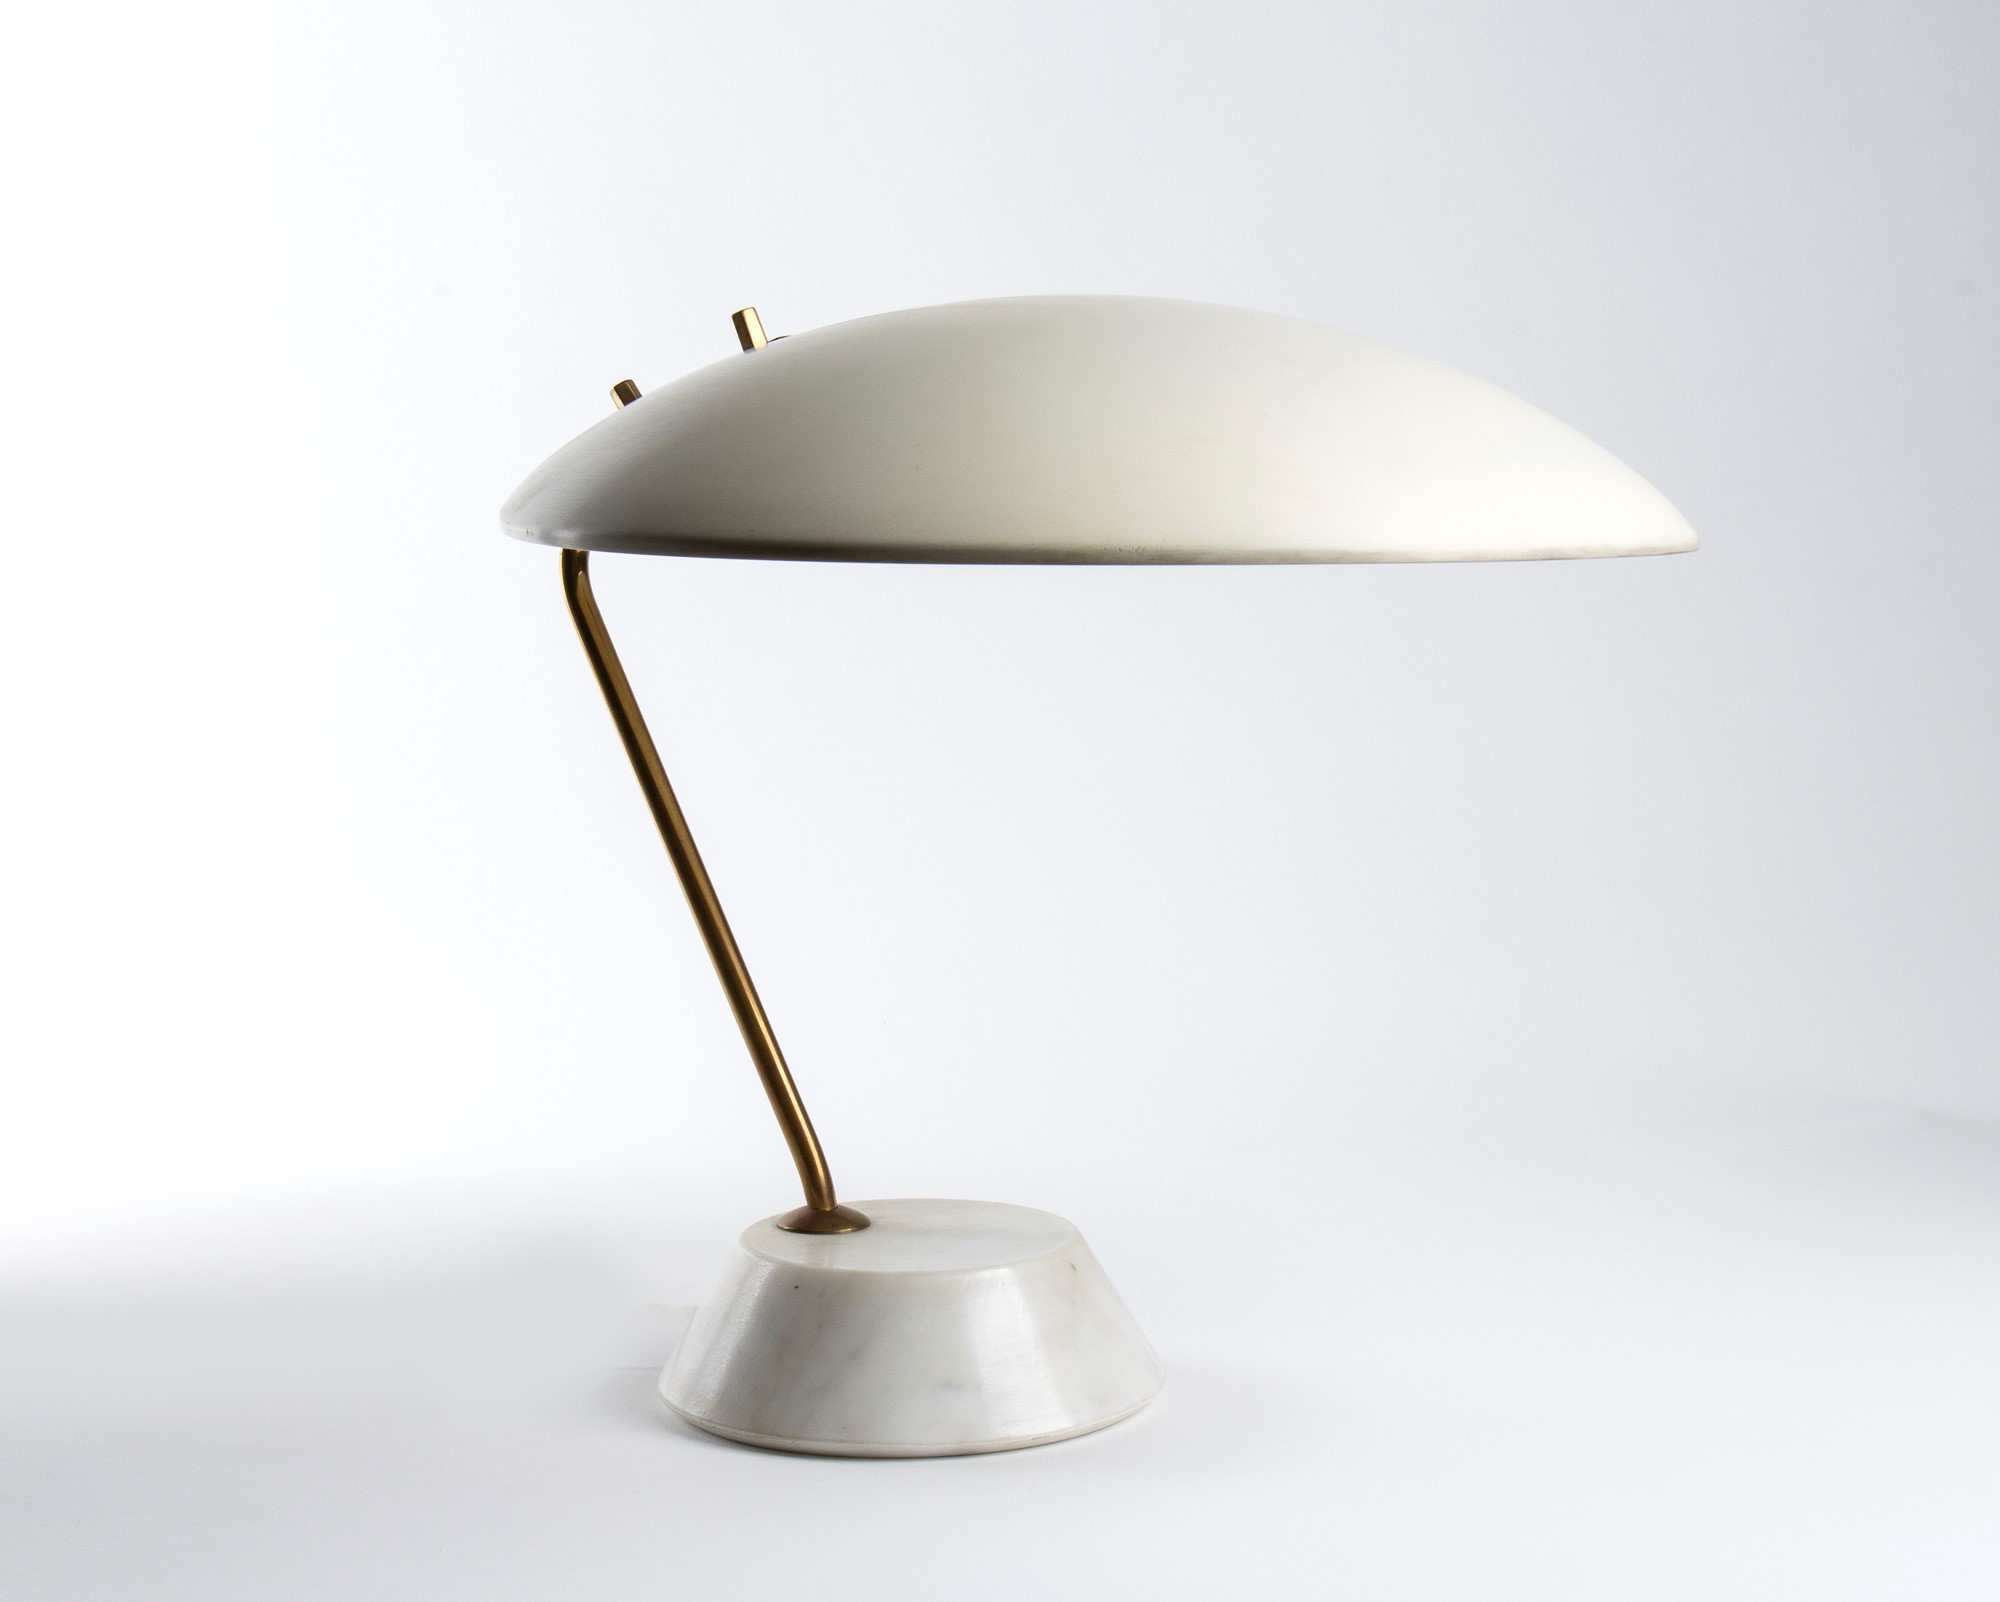 Bruno Gatta Table lamp model 8023 with a light. Cream white metal diffuser, brass stem and marble c - Image 2 of 19